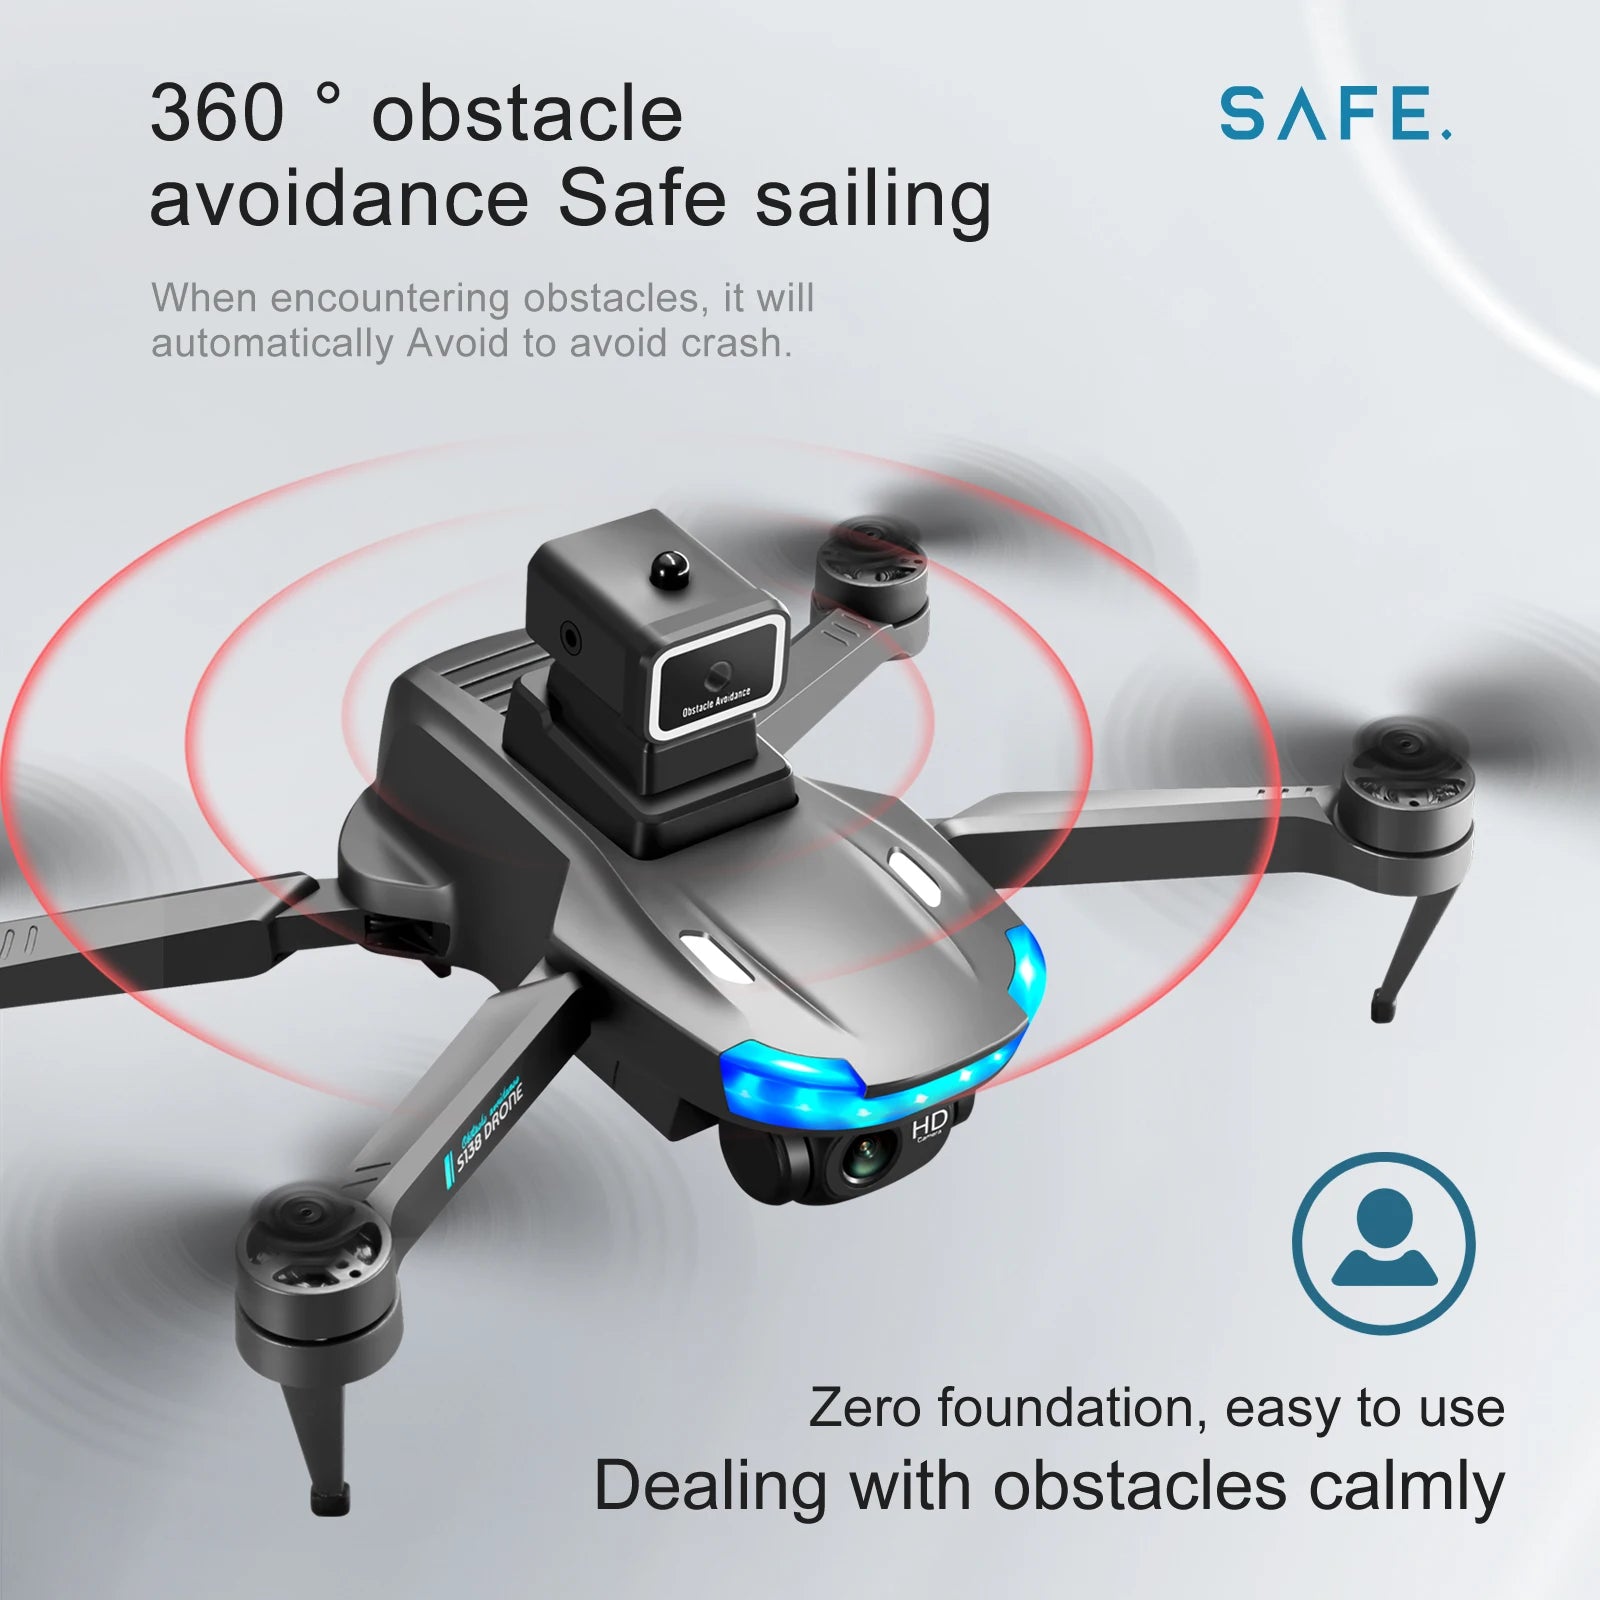 S138 Drone, avoidance safe sailing when encountering obstacles, it will automatically avoid to